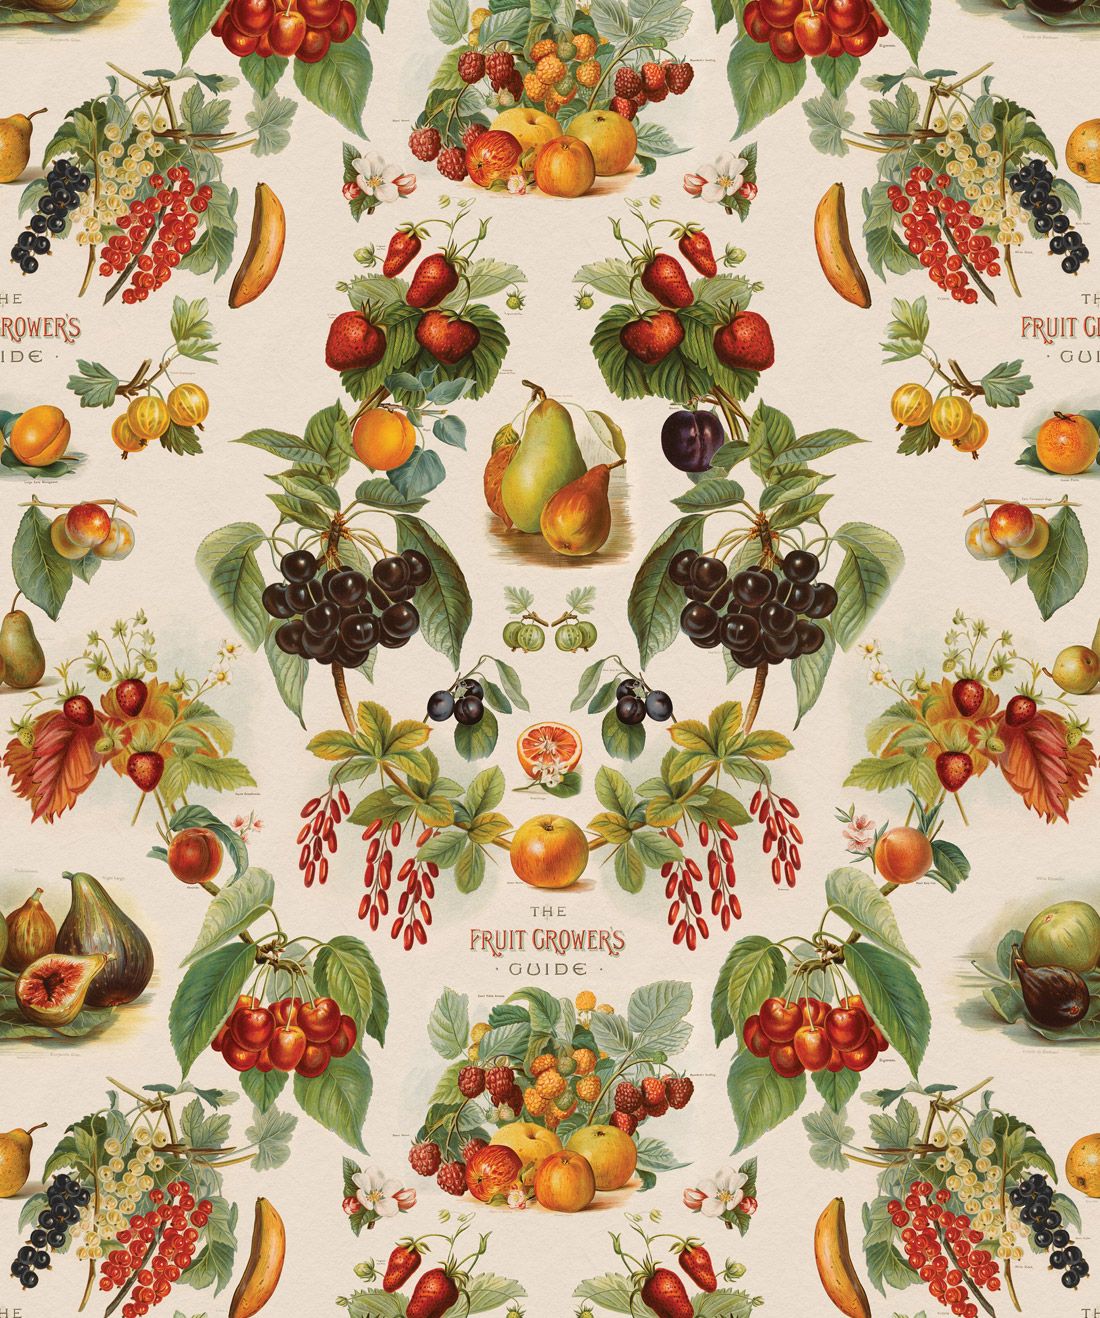 The Fruit Growers Guide Wallpaper